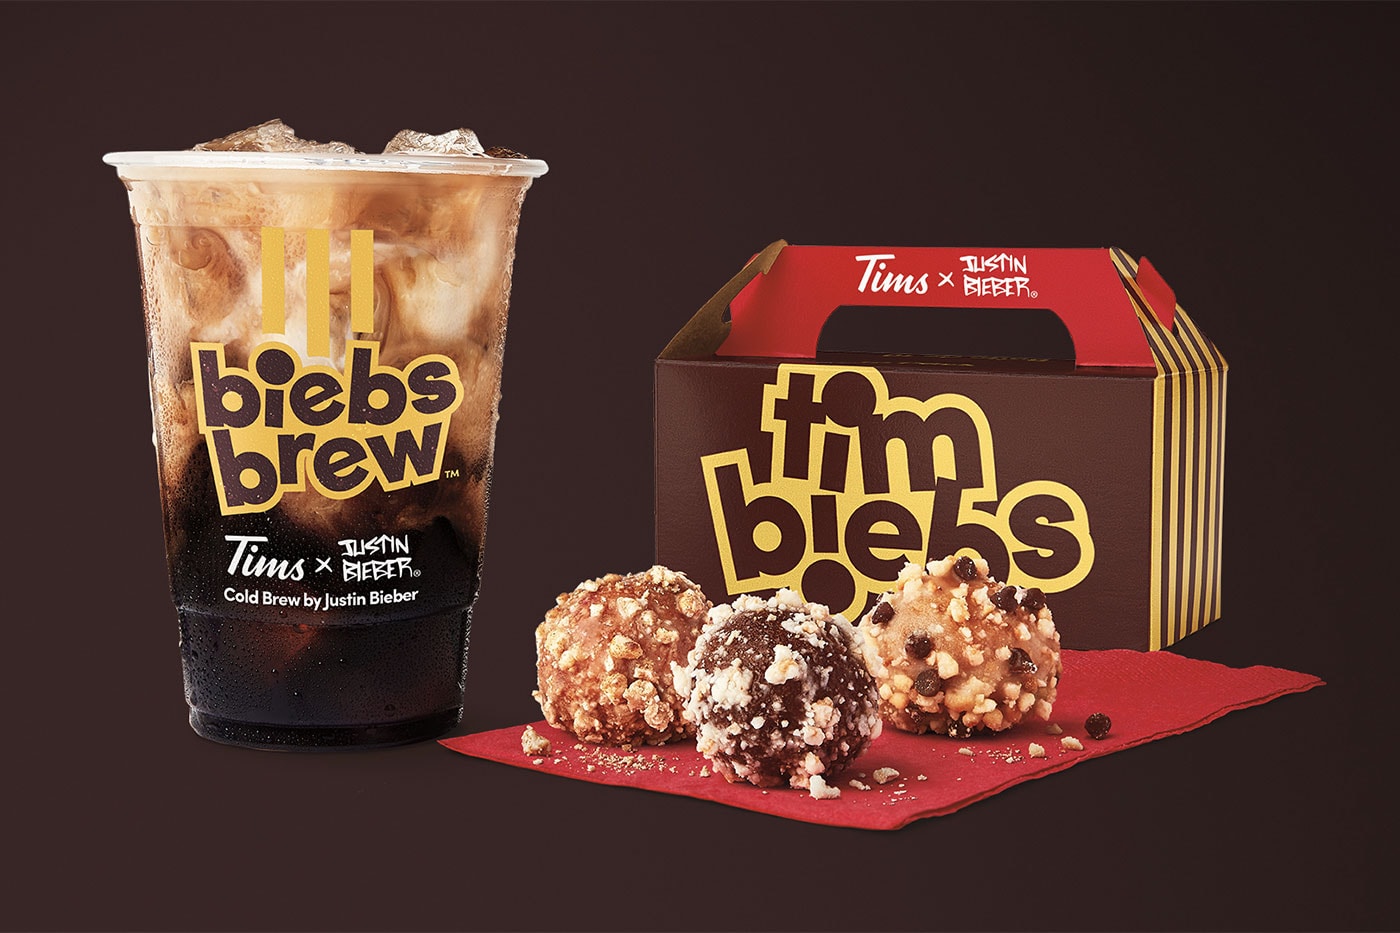 Justin Bieber and Tim Hortons to Launch Biebs Brew french vanilla cold brew coffee timbiebs timbits birthday cake waffle chocolate white fudge sour cream chocolate chip 